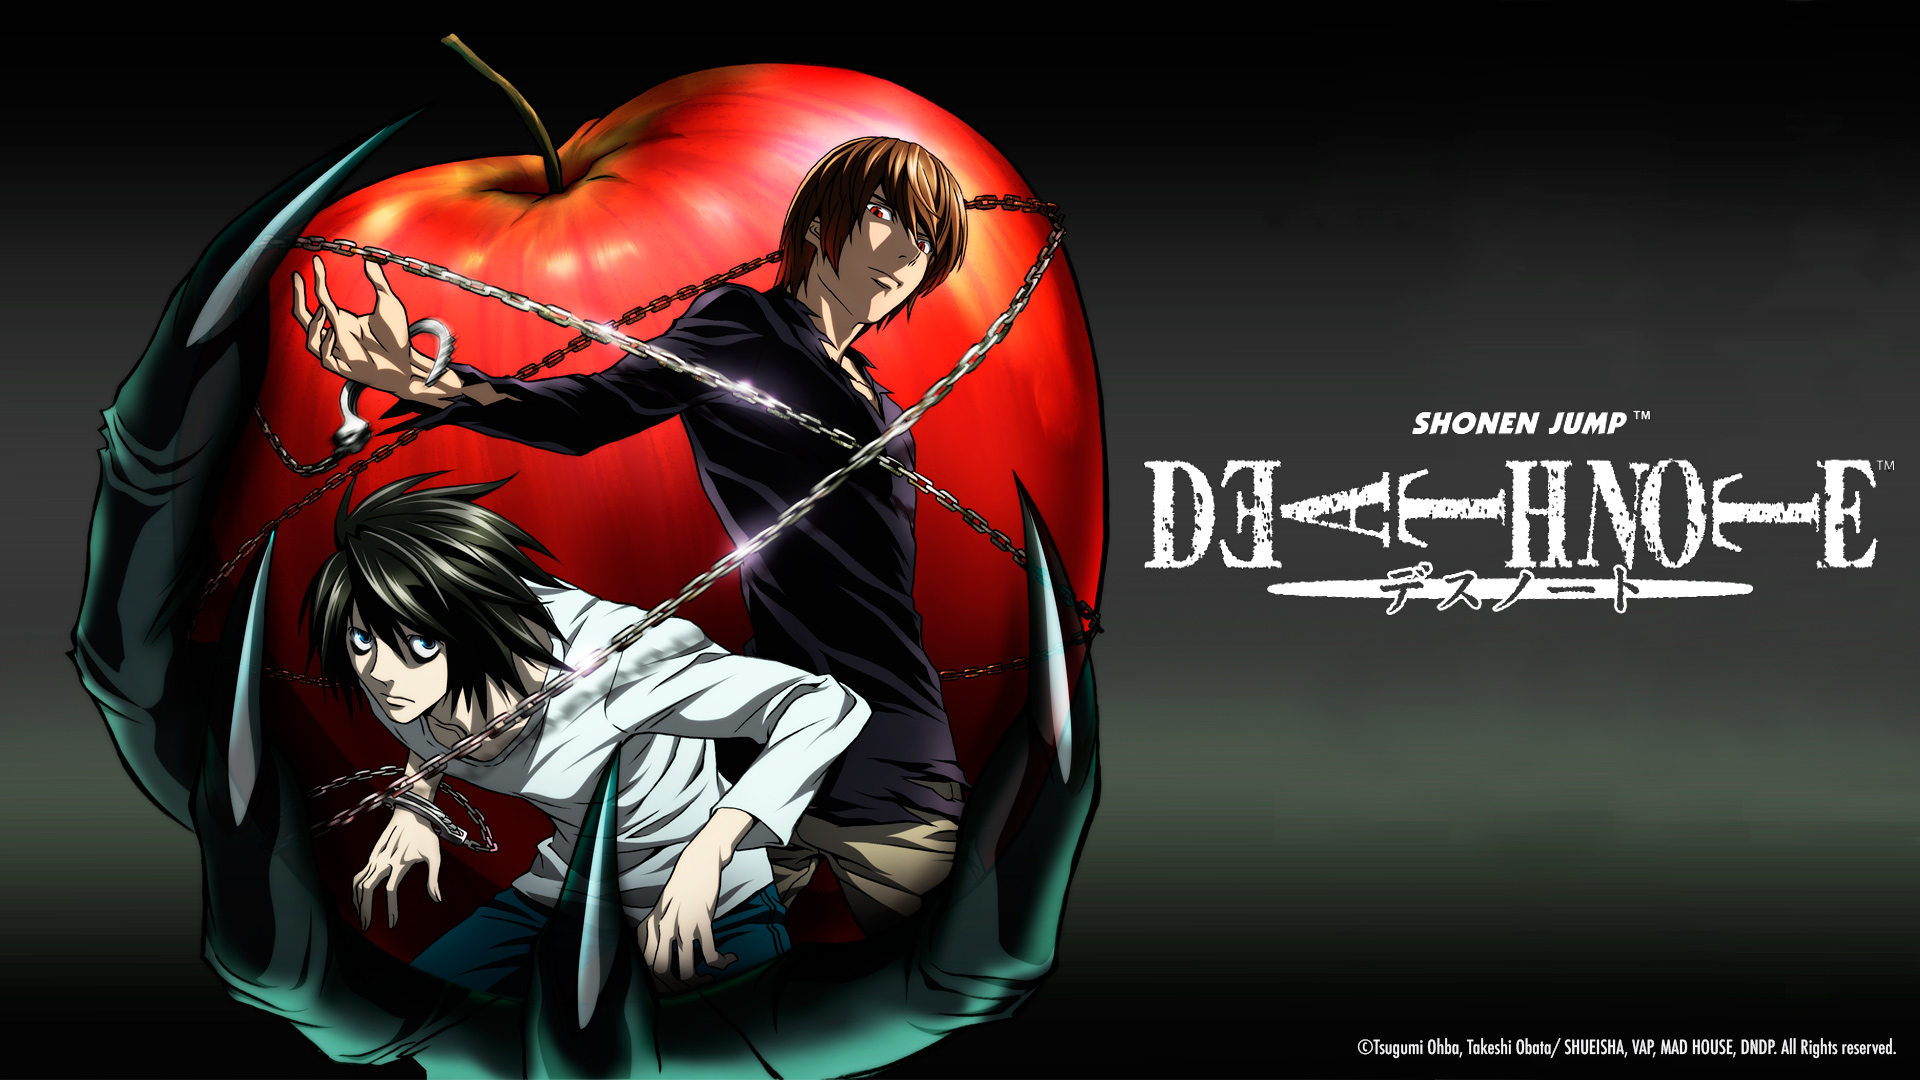 Anime Death Note Wallpaper - Resolution:1920x1080 - ID:1291877 